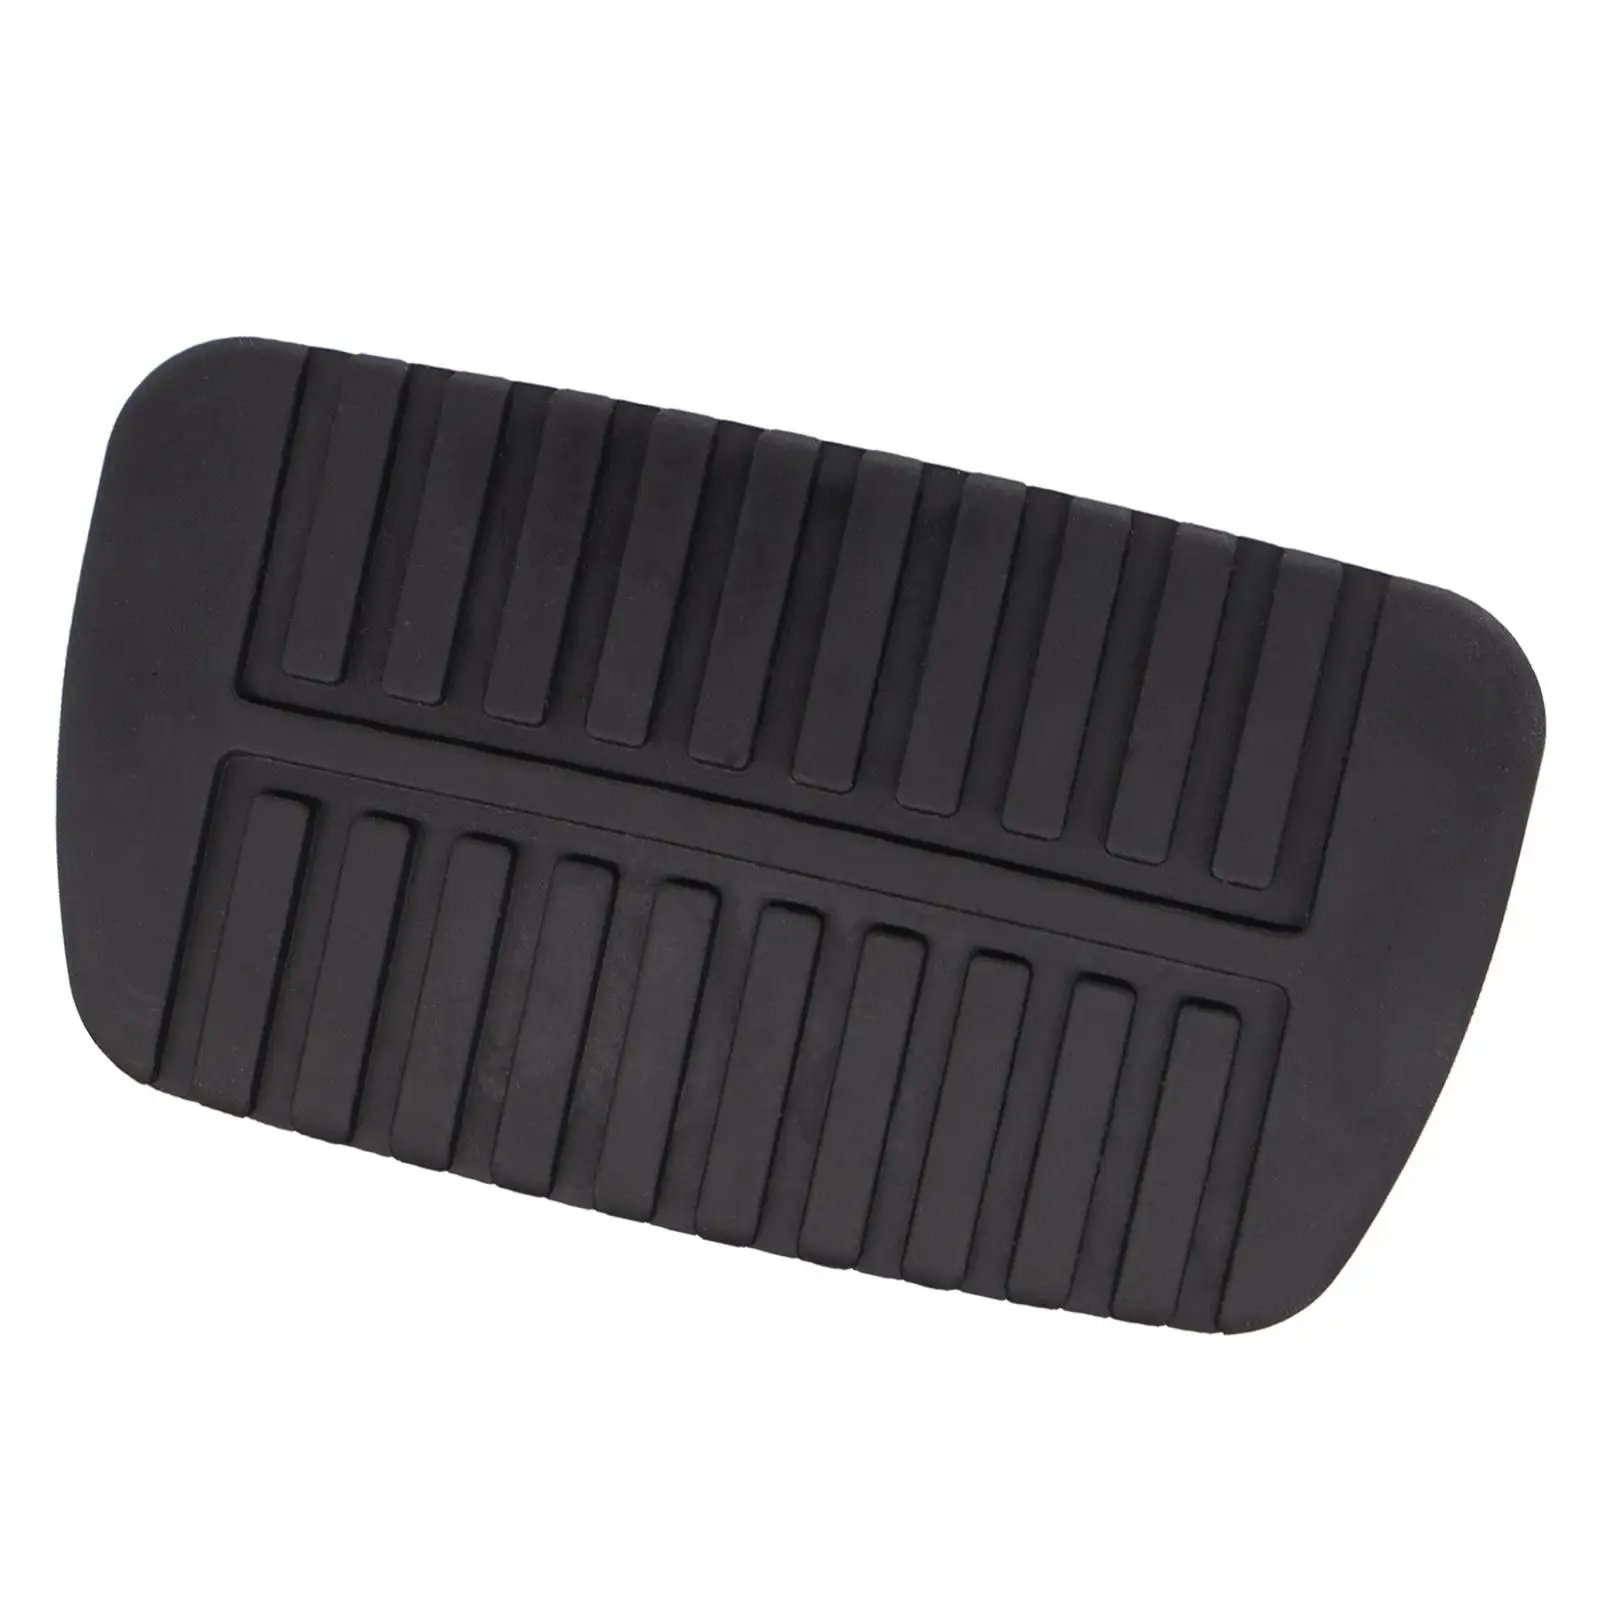 Brake Pedal Pad 36015GA121 Durable Replaces Automatic Parts Easy to Install Black Brake Pedal Pad Cover for Subaru Tribeca